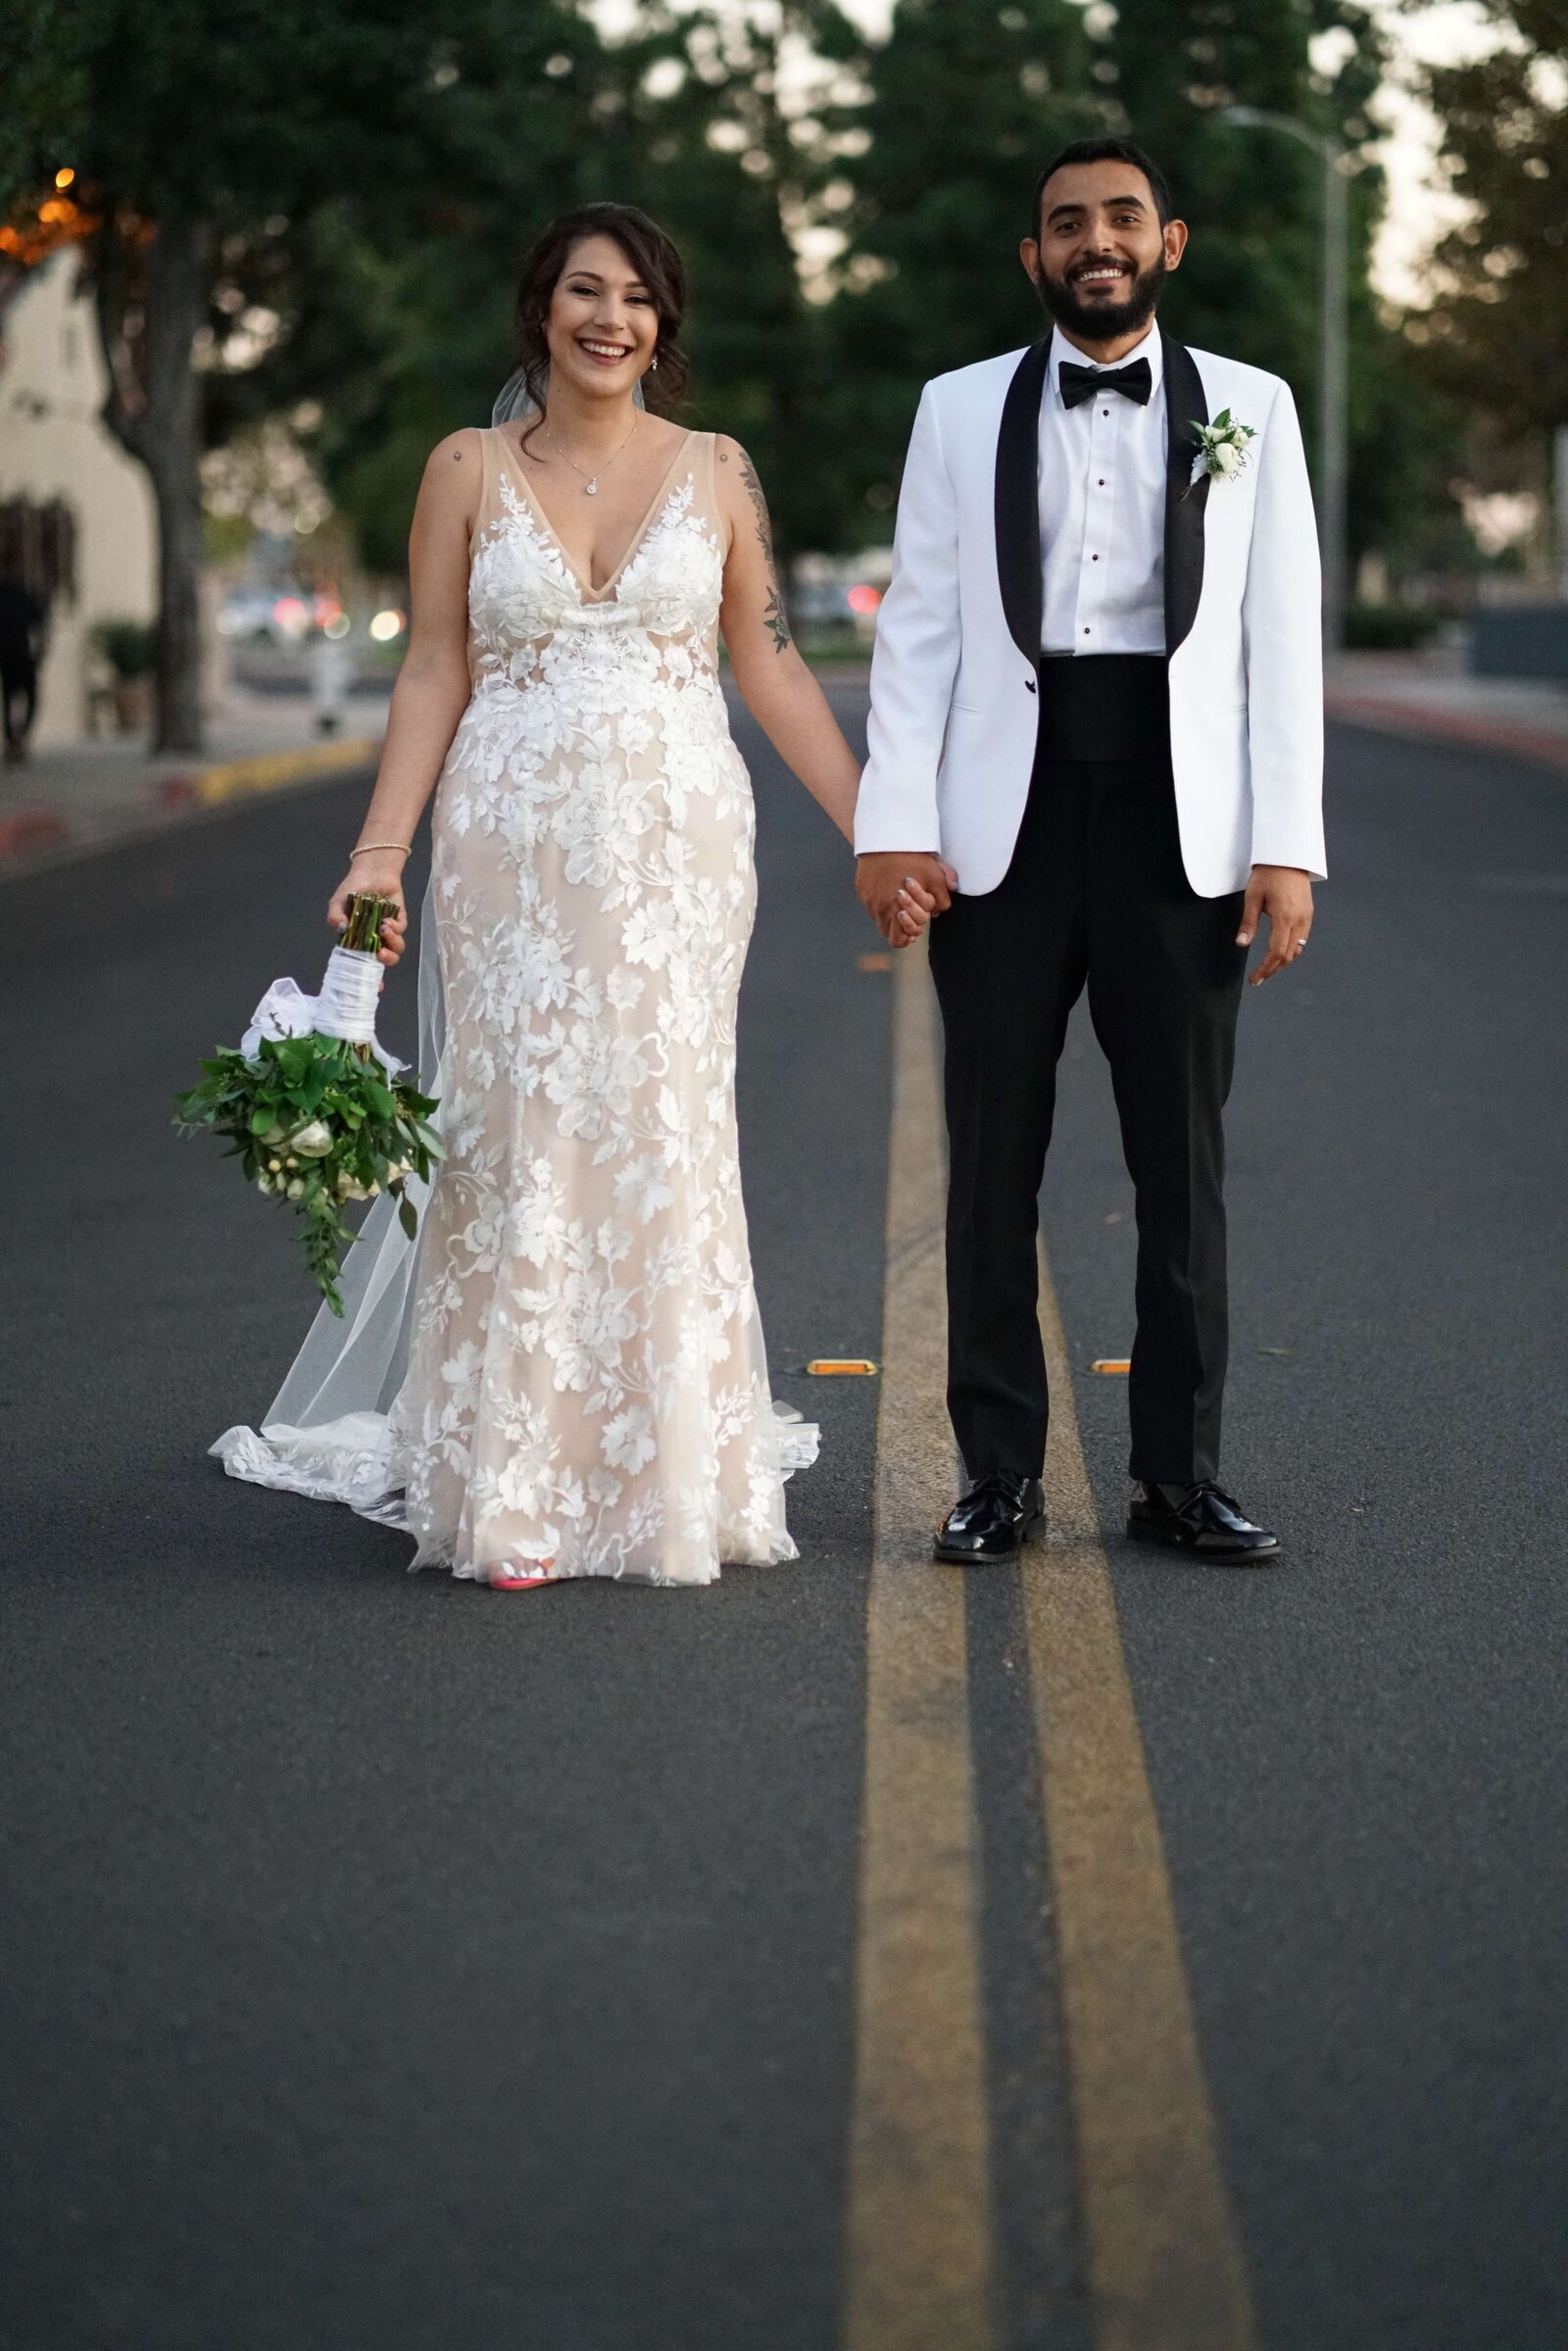 Newport Beach Wedding Photographer bride and groom standing together on road